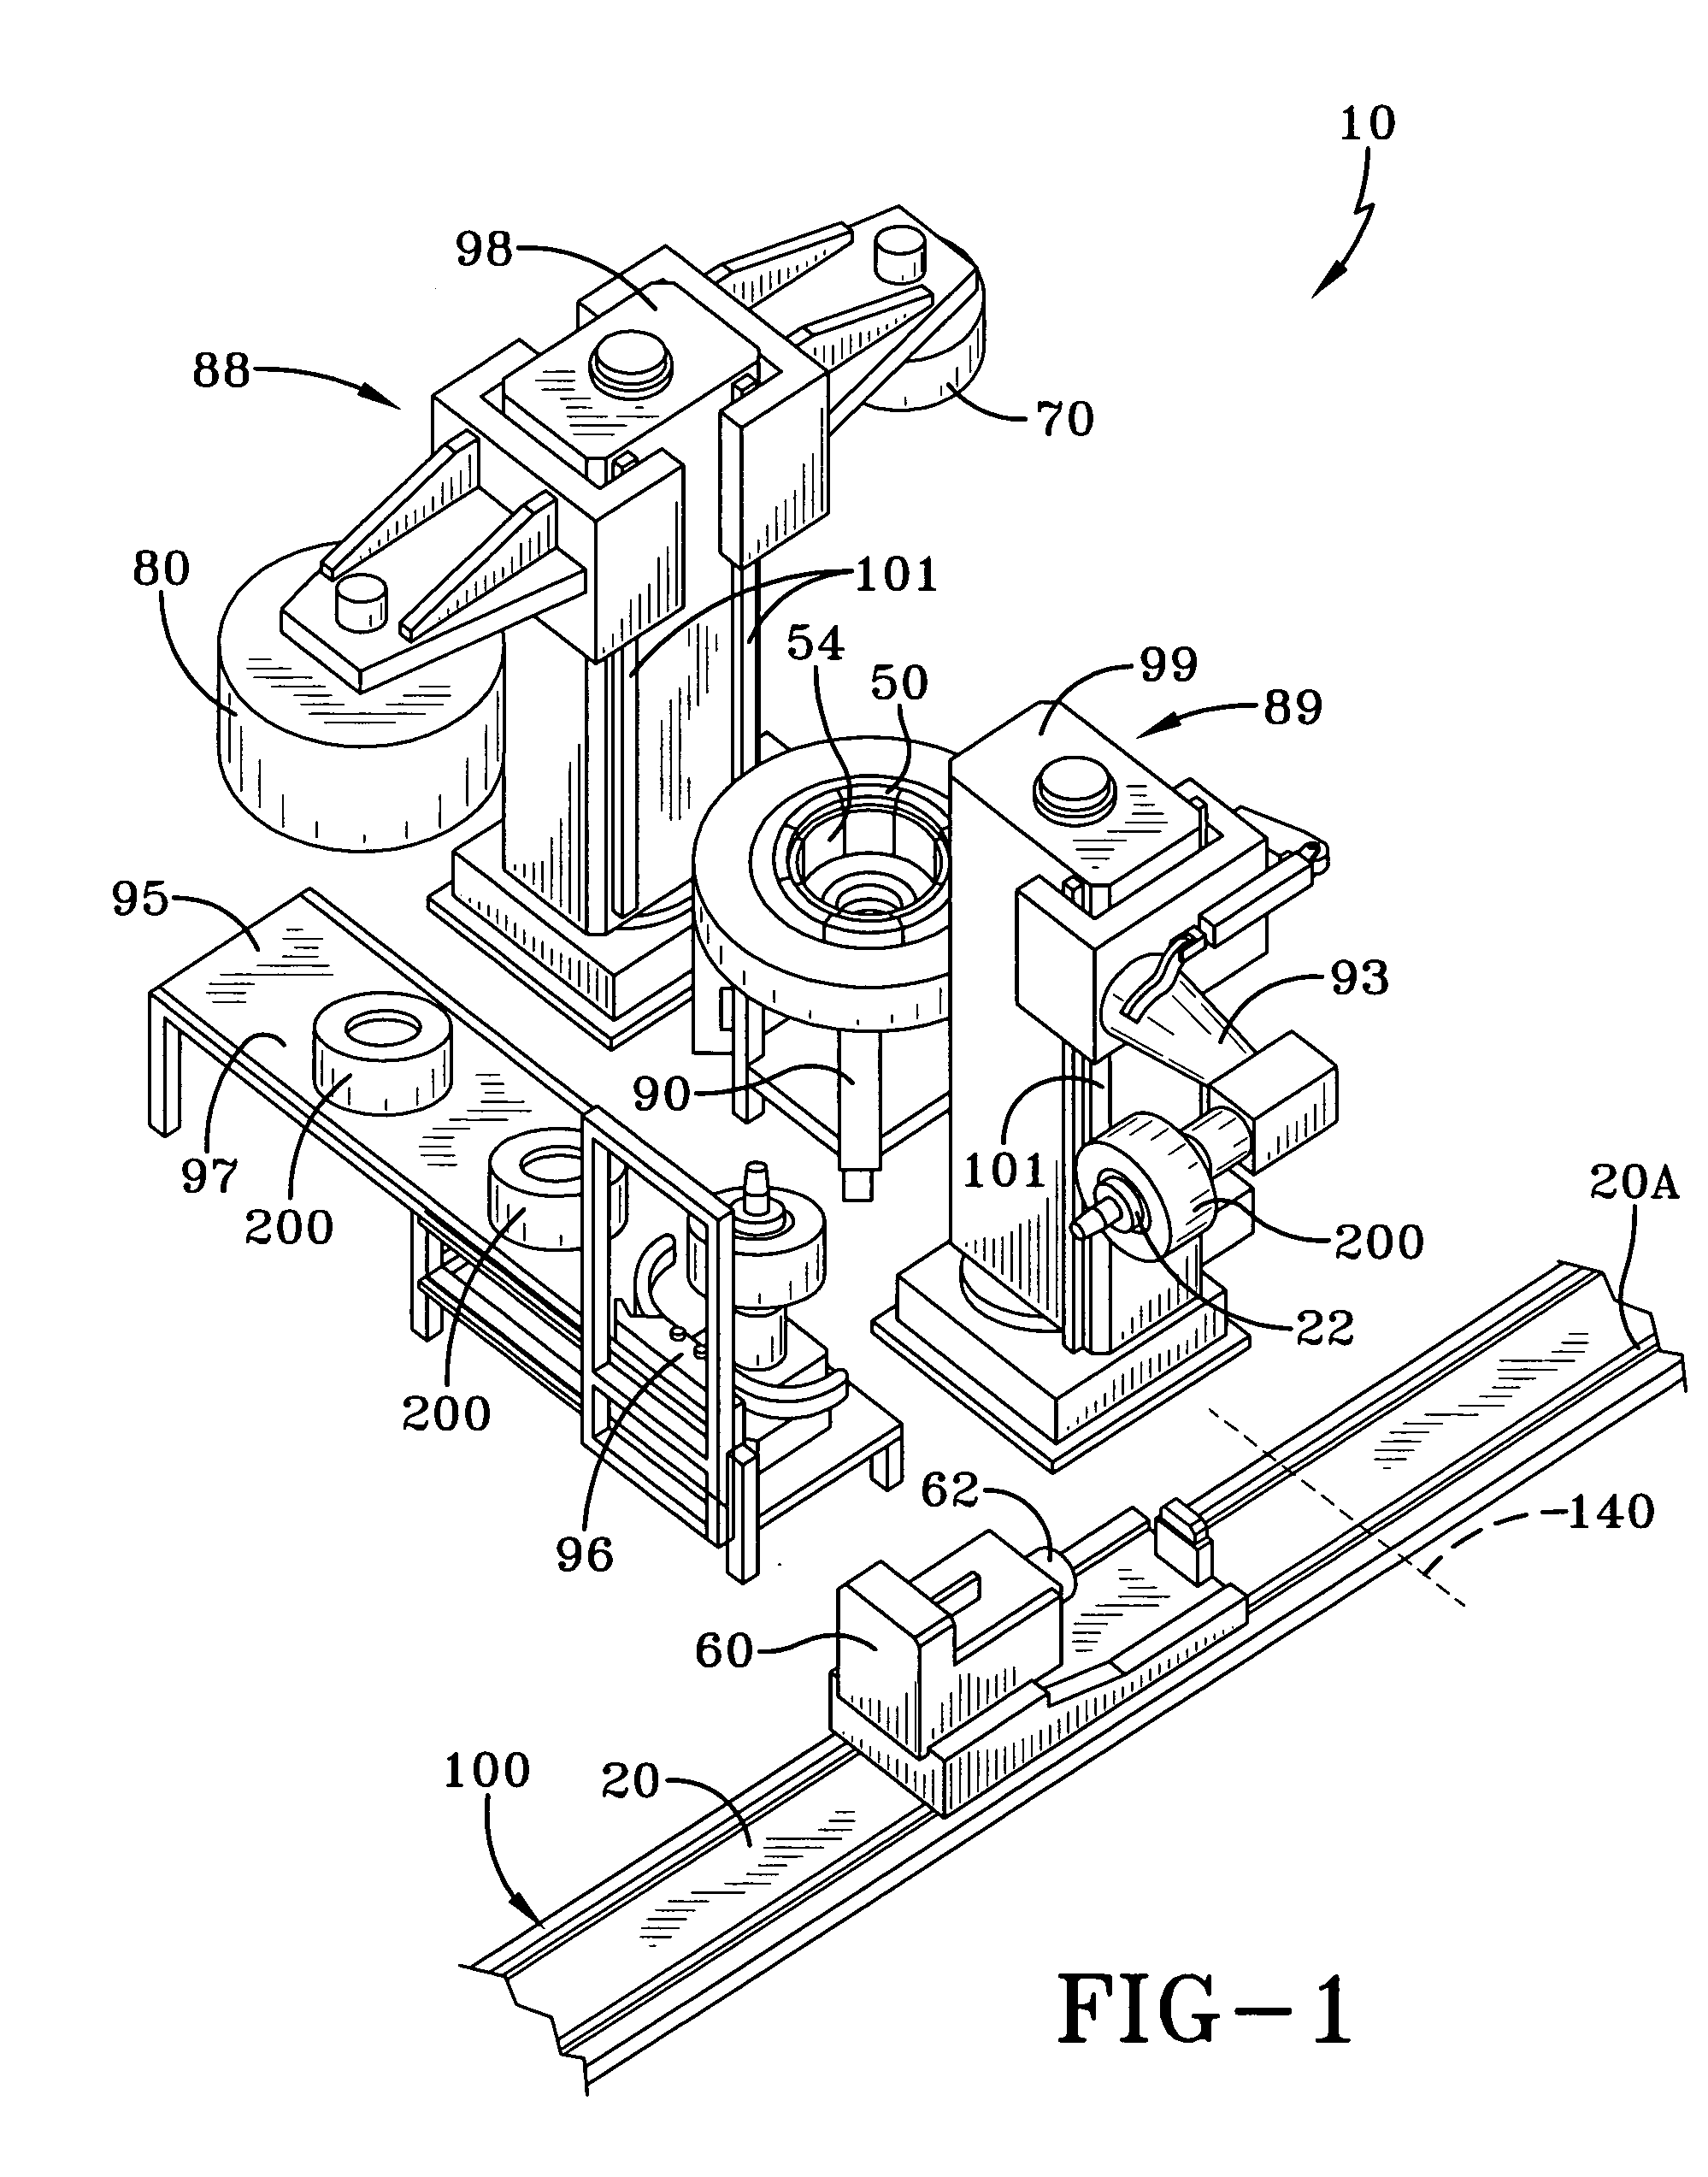 Single station tire curing method and apparatus